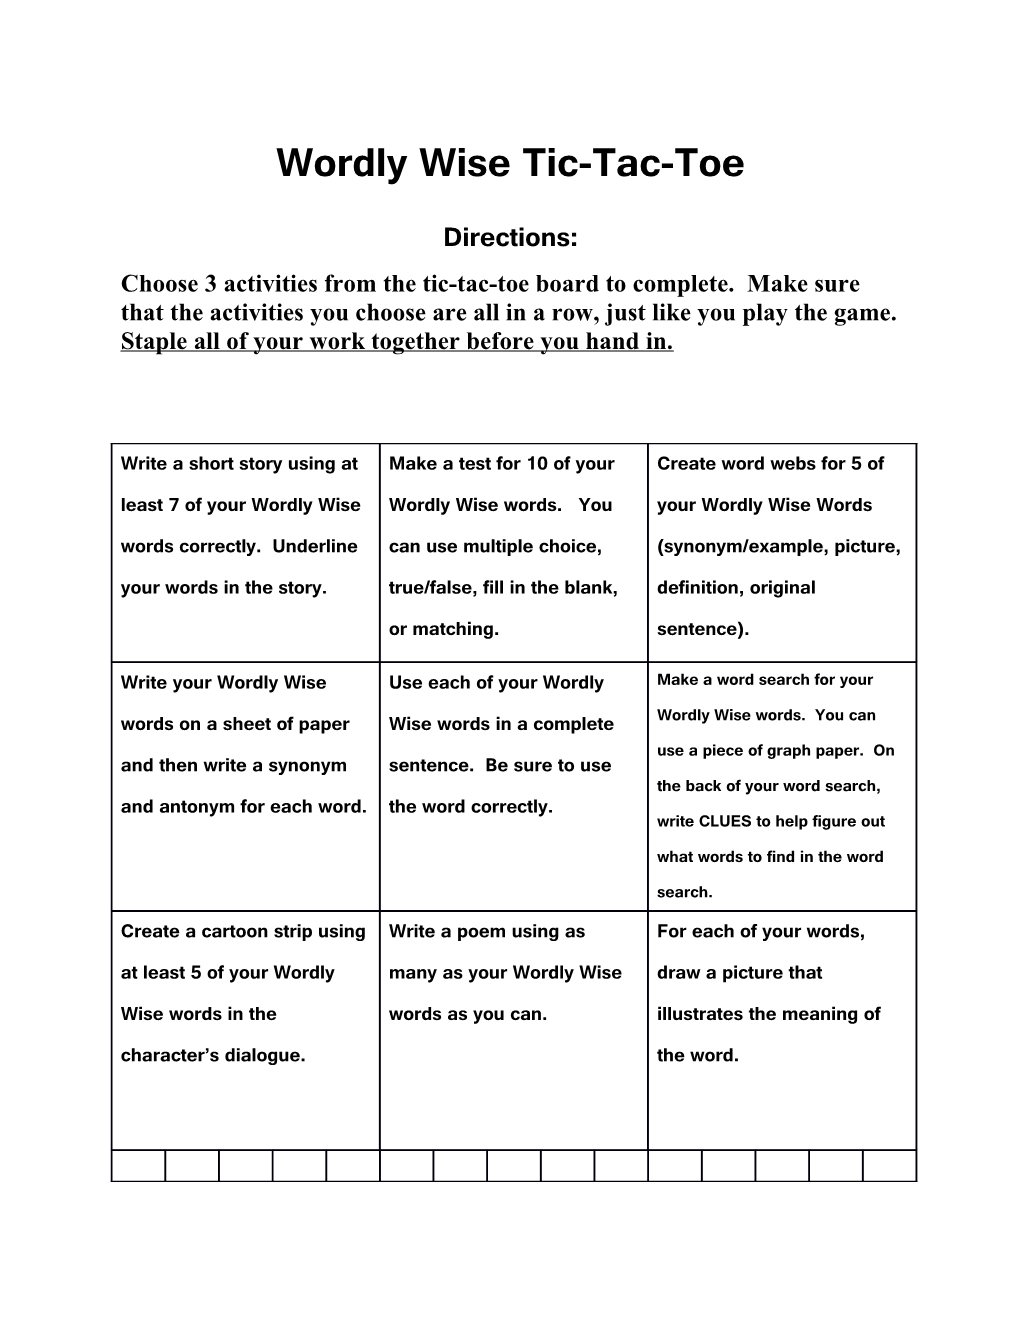 Wordly Wise Tic-Tac-Toe